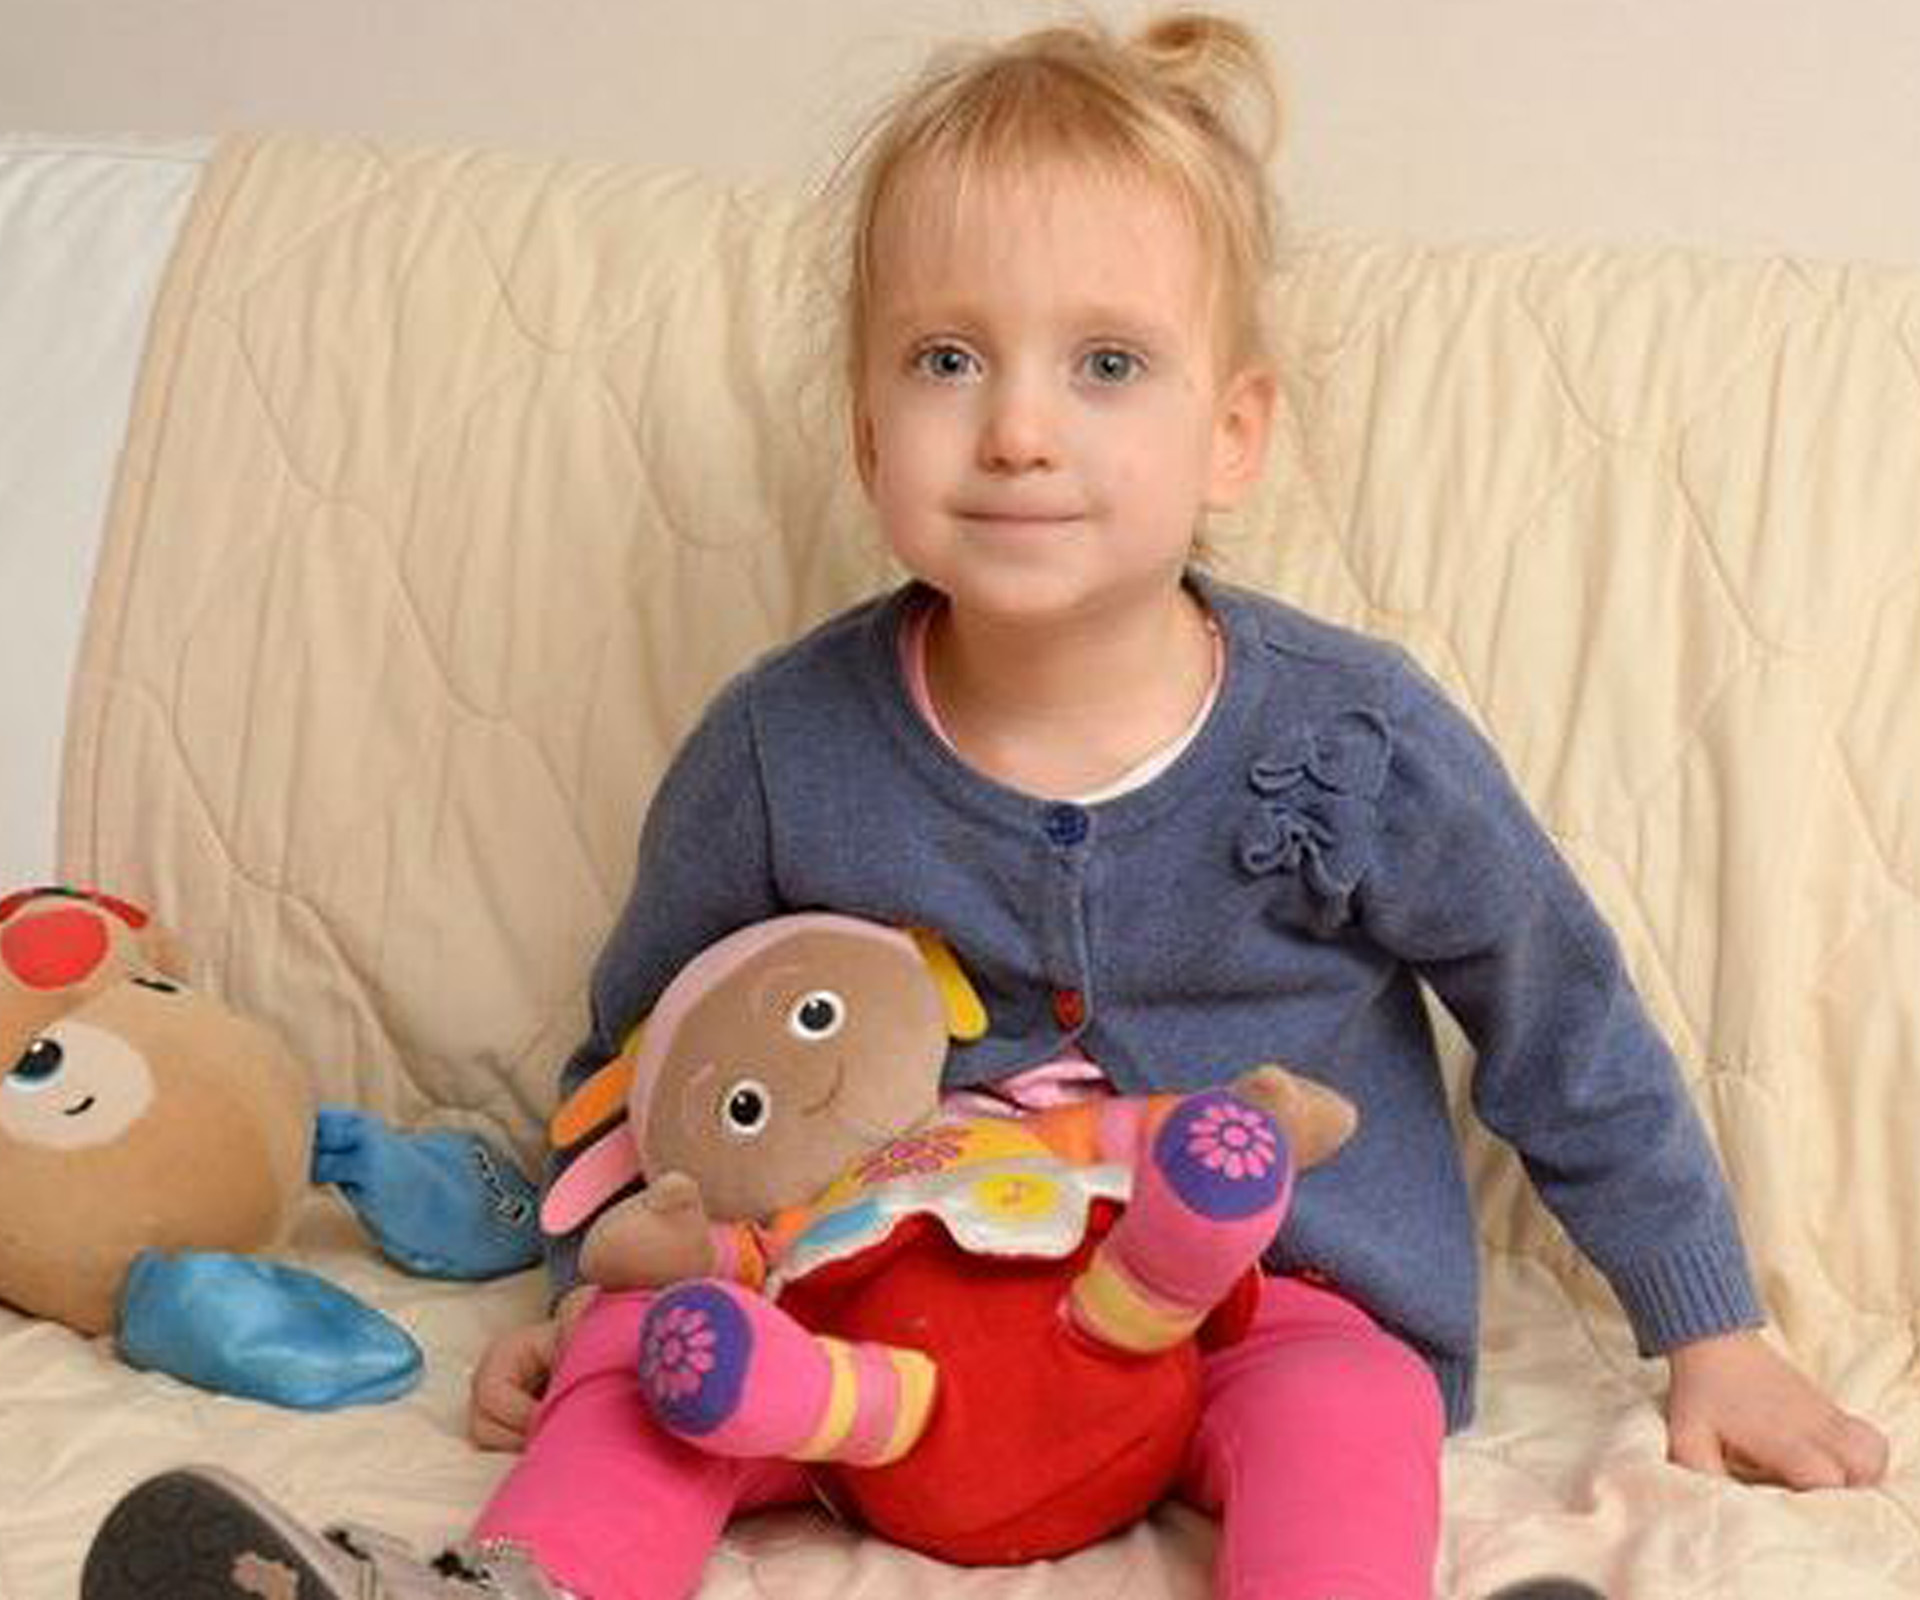 Hundreds offer to adopt British girl with cerebral palsy